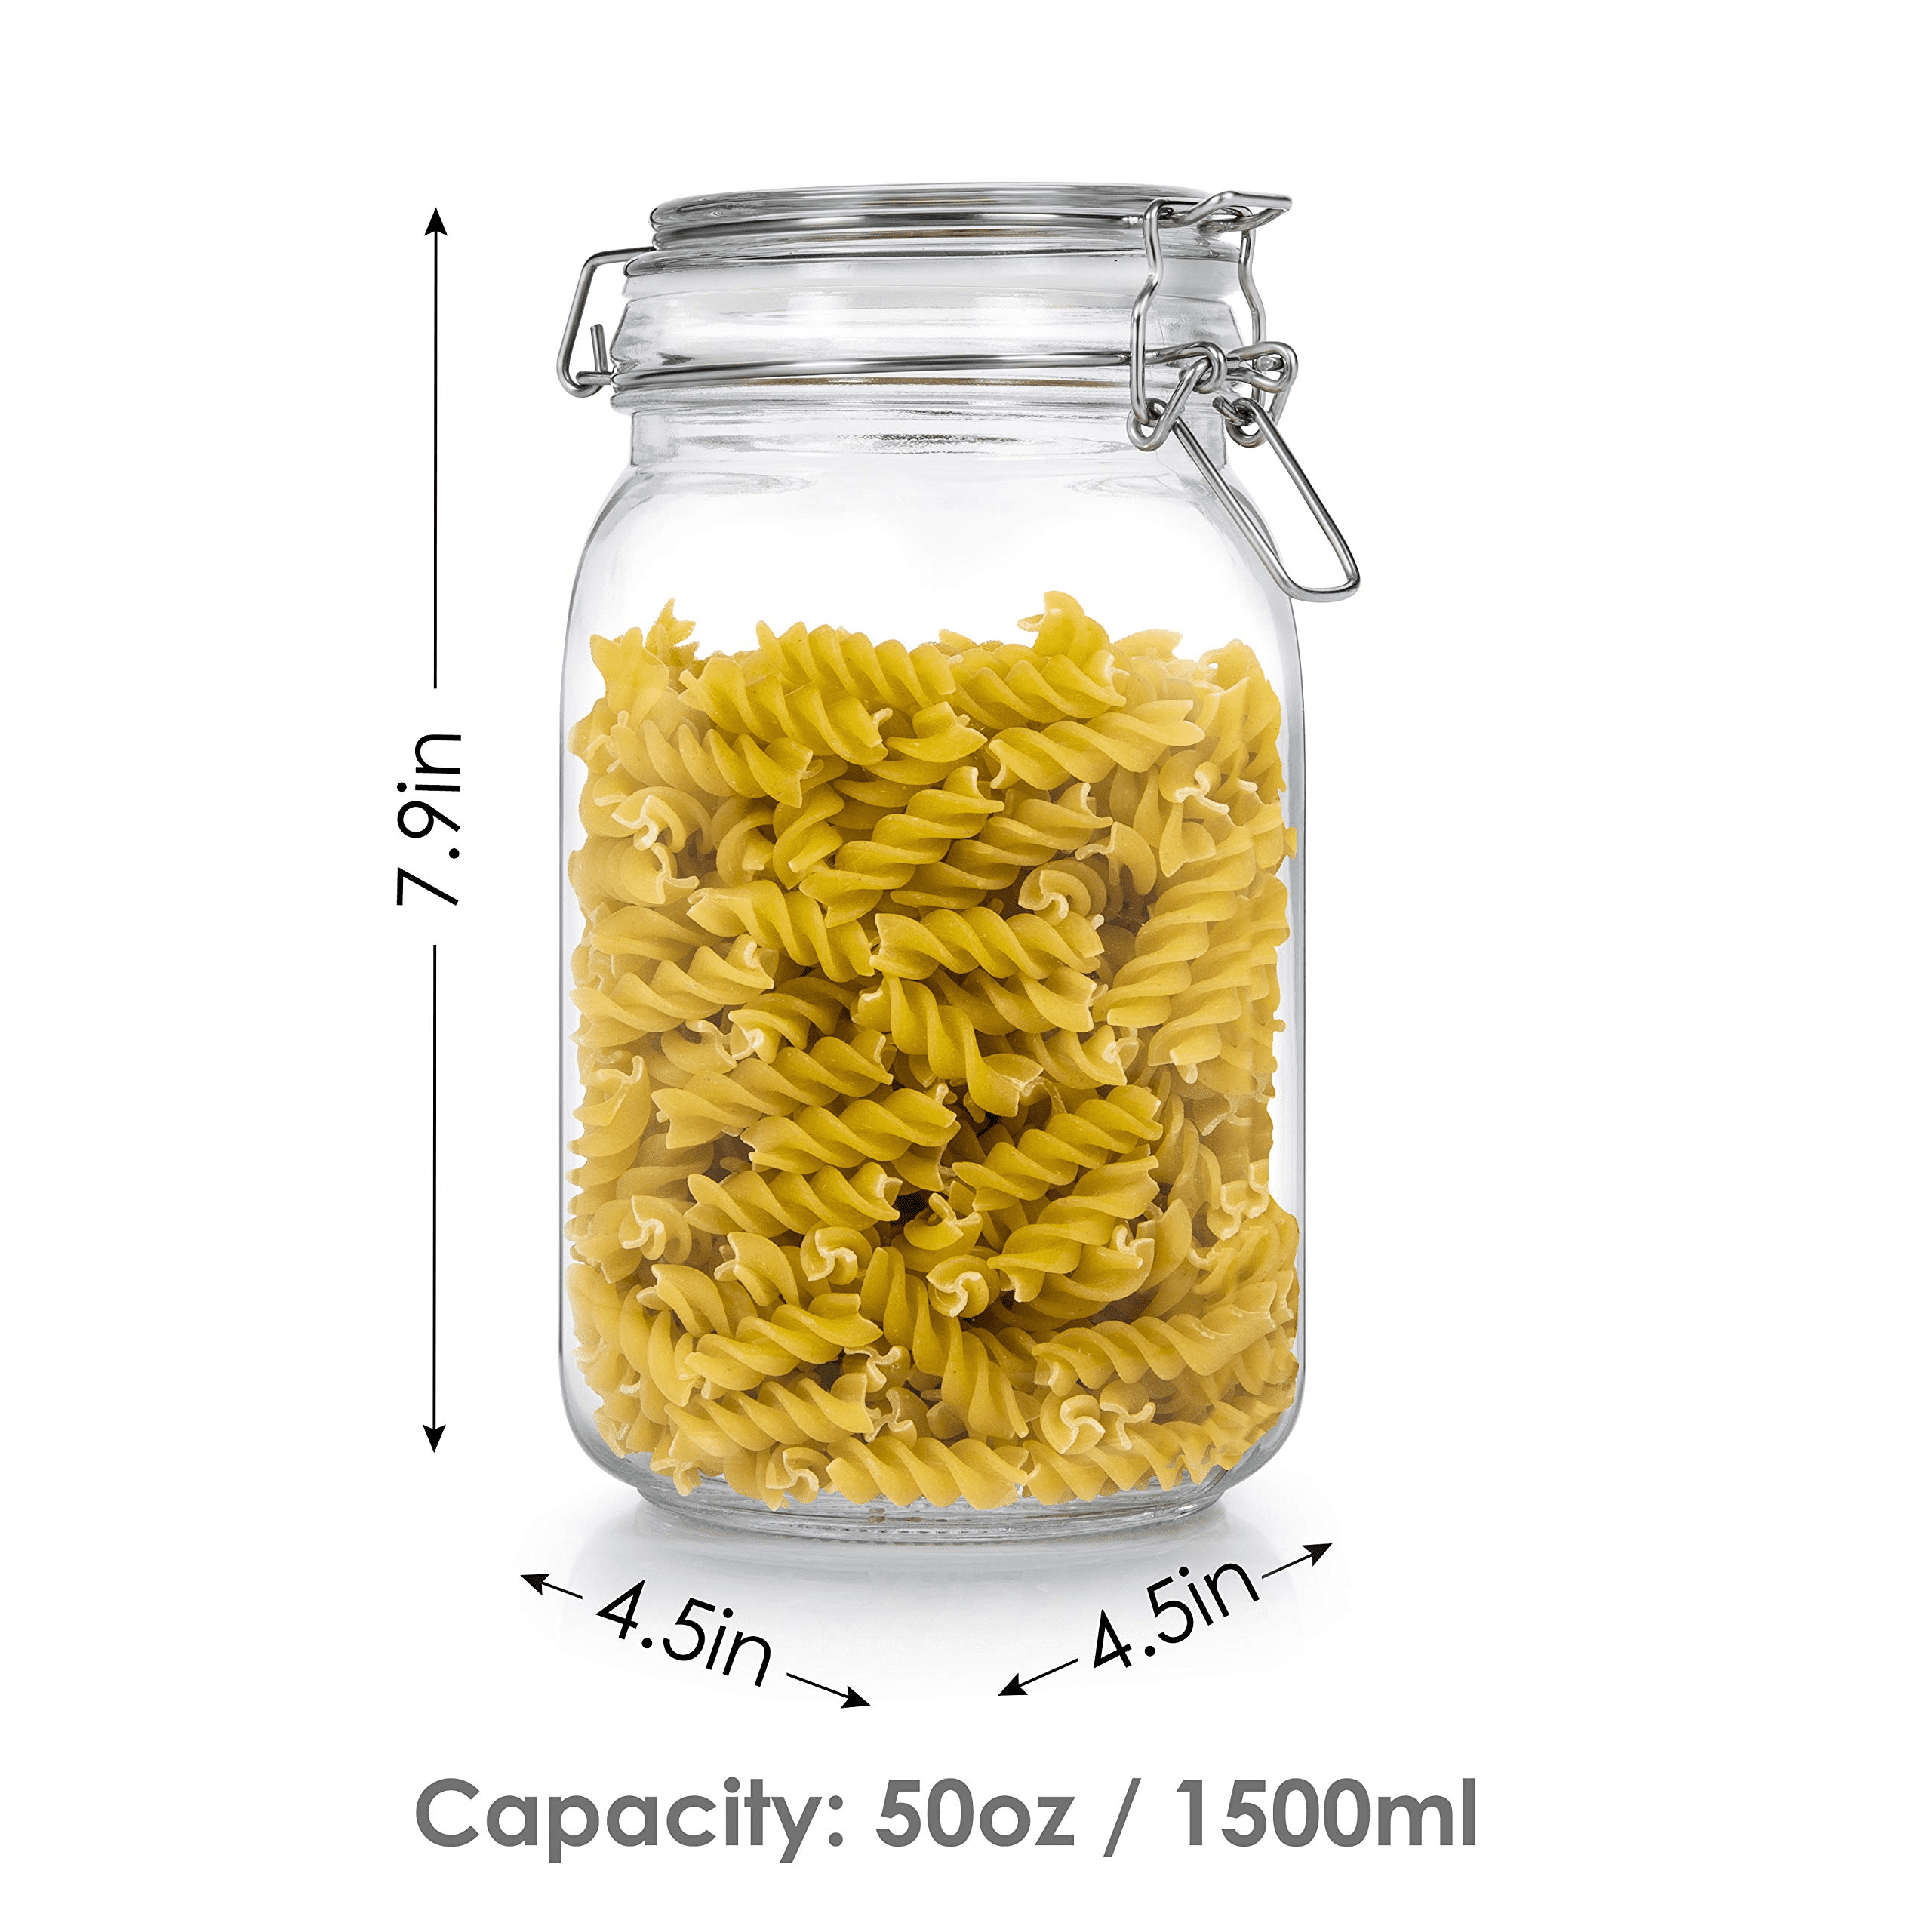  Mifoci 50 Pcs 10 oz Clear Plastic Mason Jars with Lids  Refillable Round Empty Jars Airtight Storage Jars Containers Food Plastic  Jars for Household and Kitchen Organizing, 5 Colors : Home & Kitchen